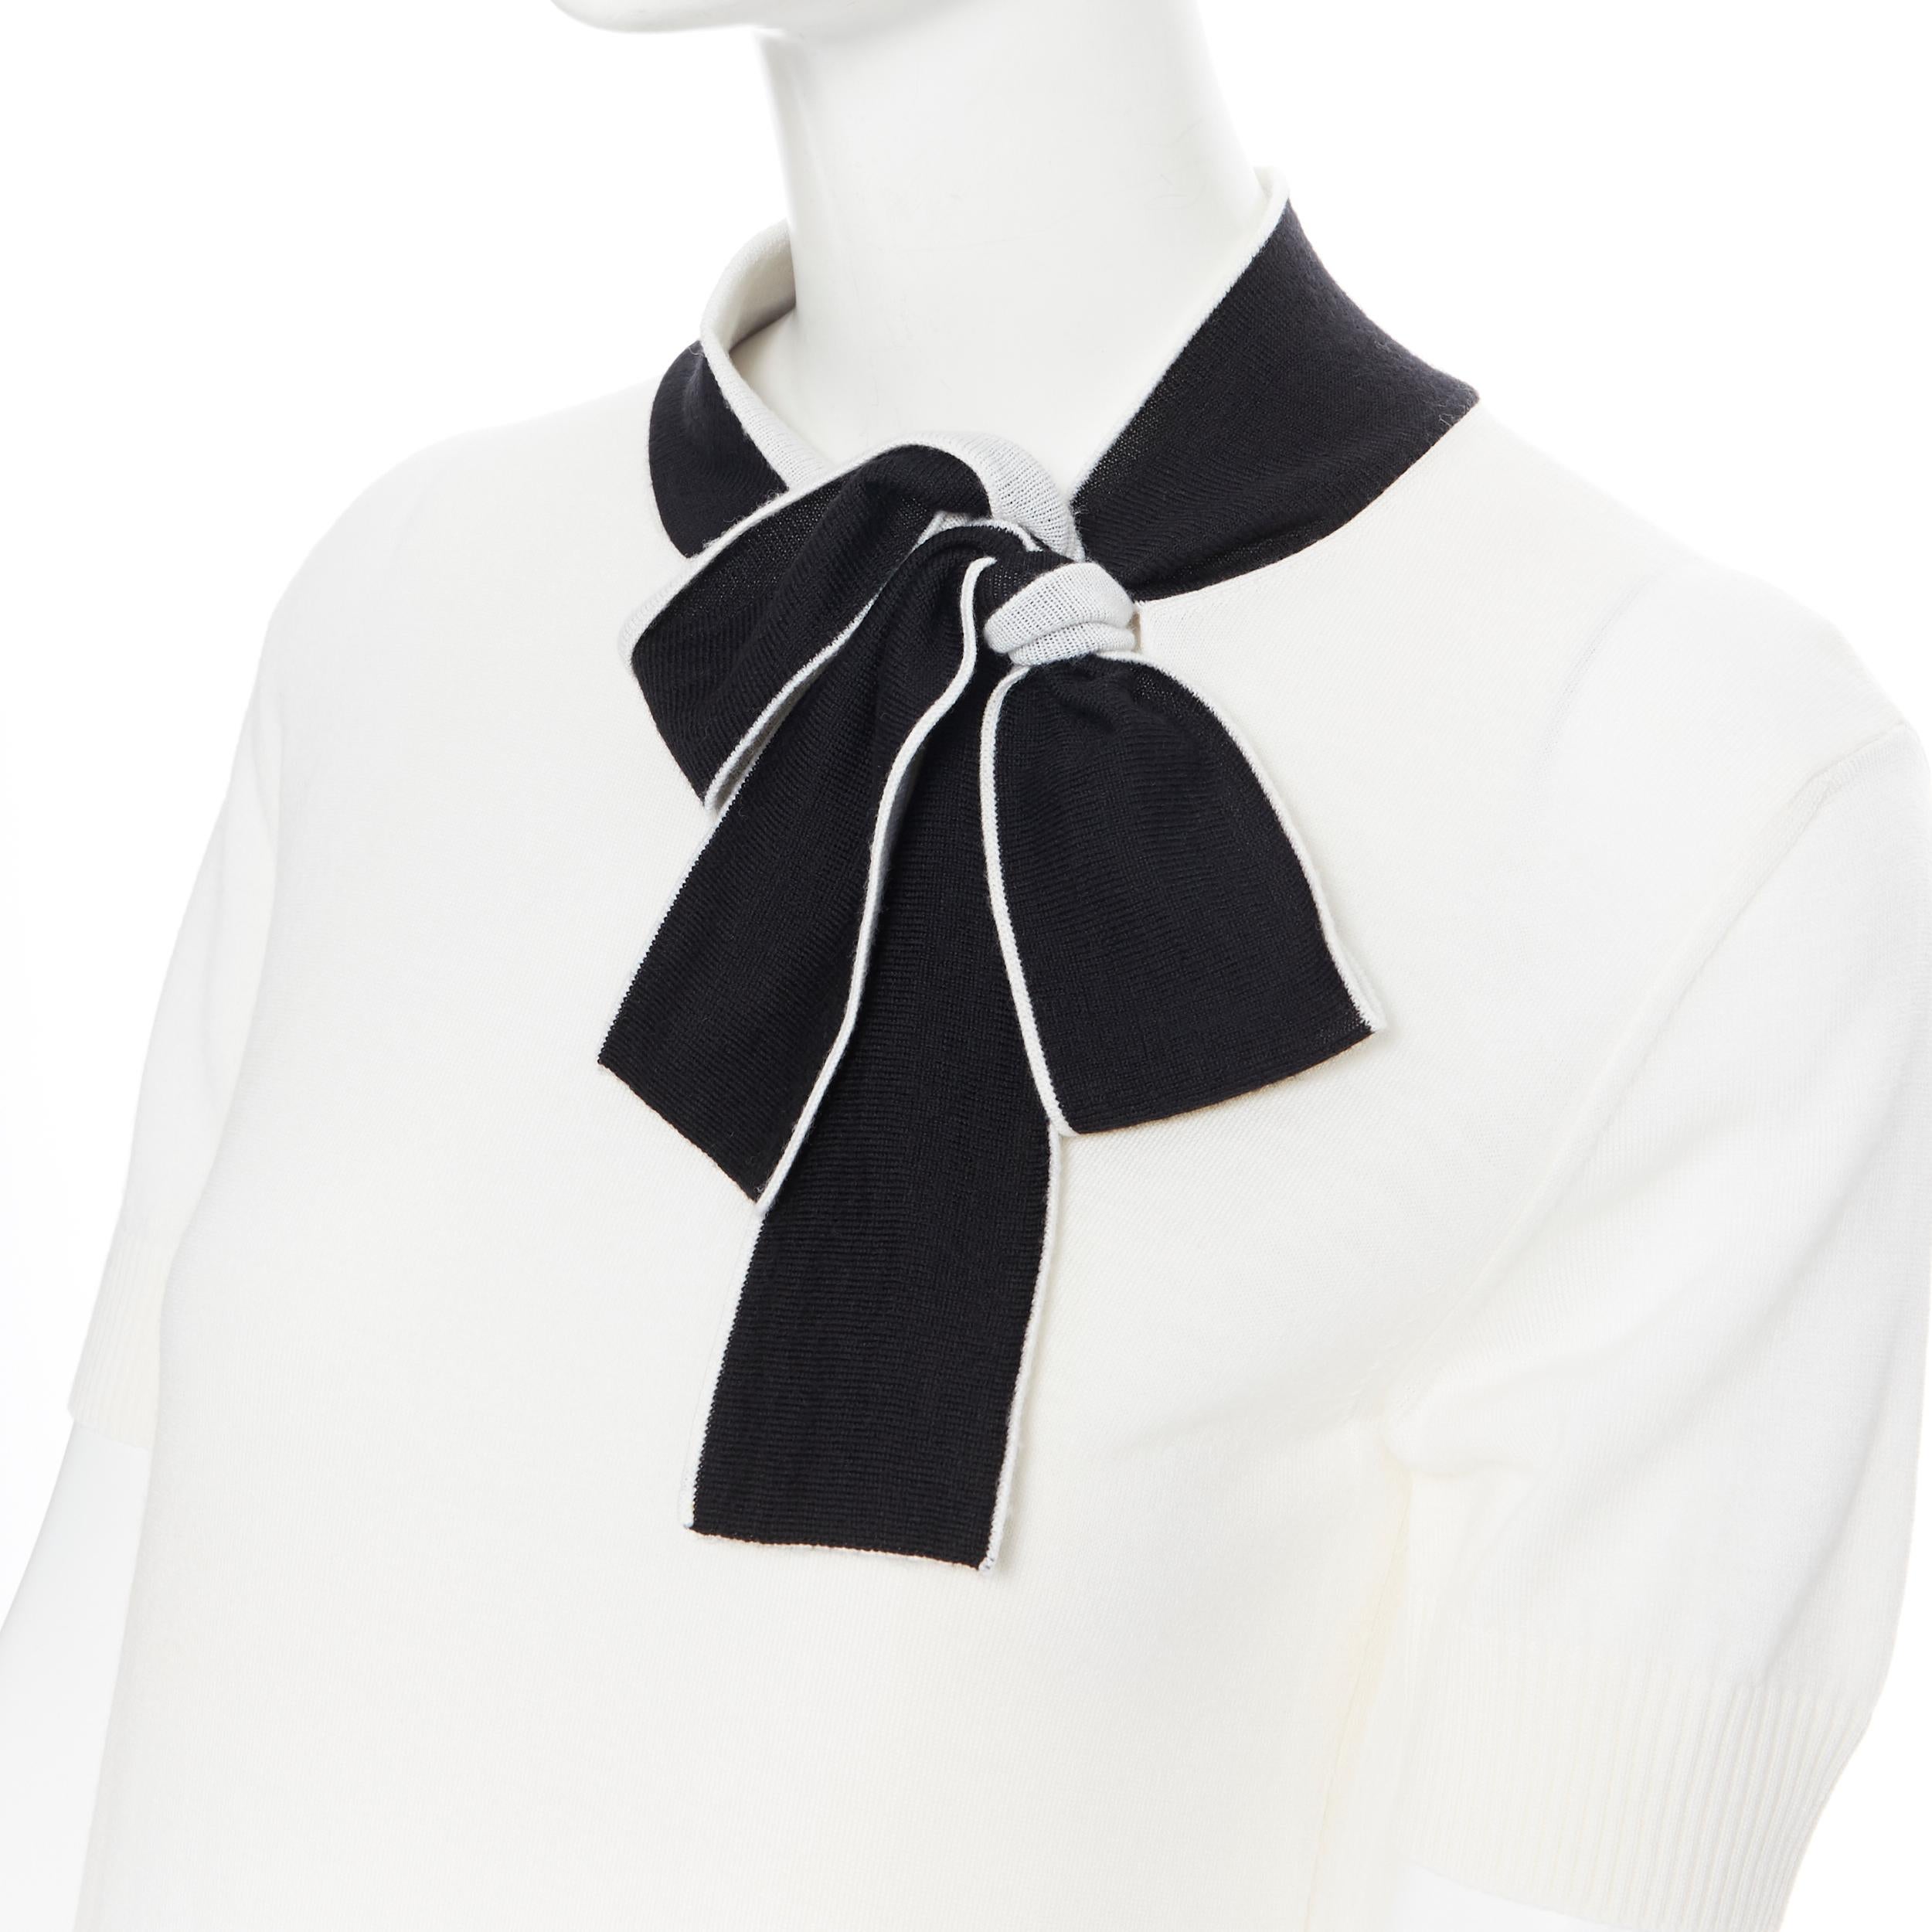 LANVIN ivory white wool black bow tie short sleeve sweater top XS
Brand: Lanvin
Designer: Alber Elbaz
Model Name / Style: Bow tie sweater
Material: Wool blend
Color: White
Pattern: Solid
Extra Detail: Self tie bow at neckline. Short sleeve.
Made in: